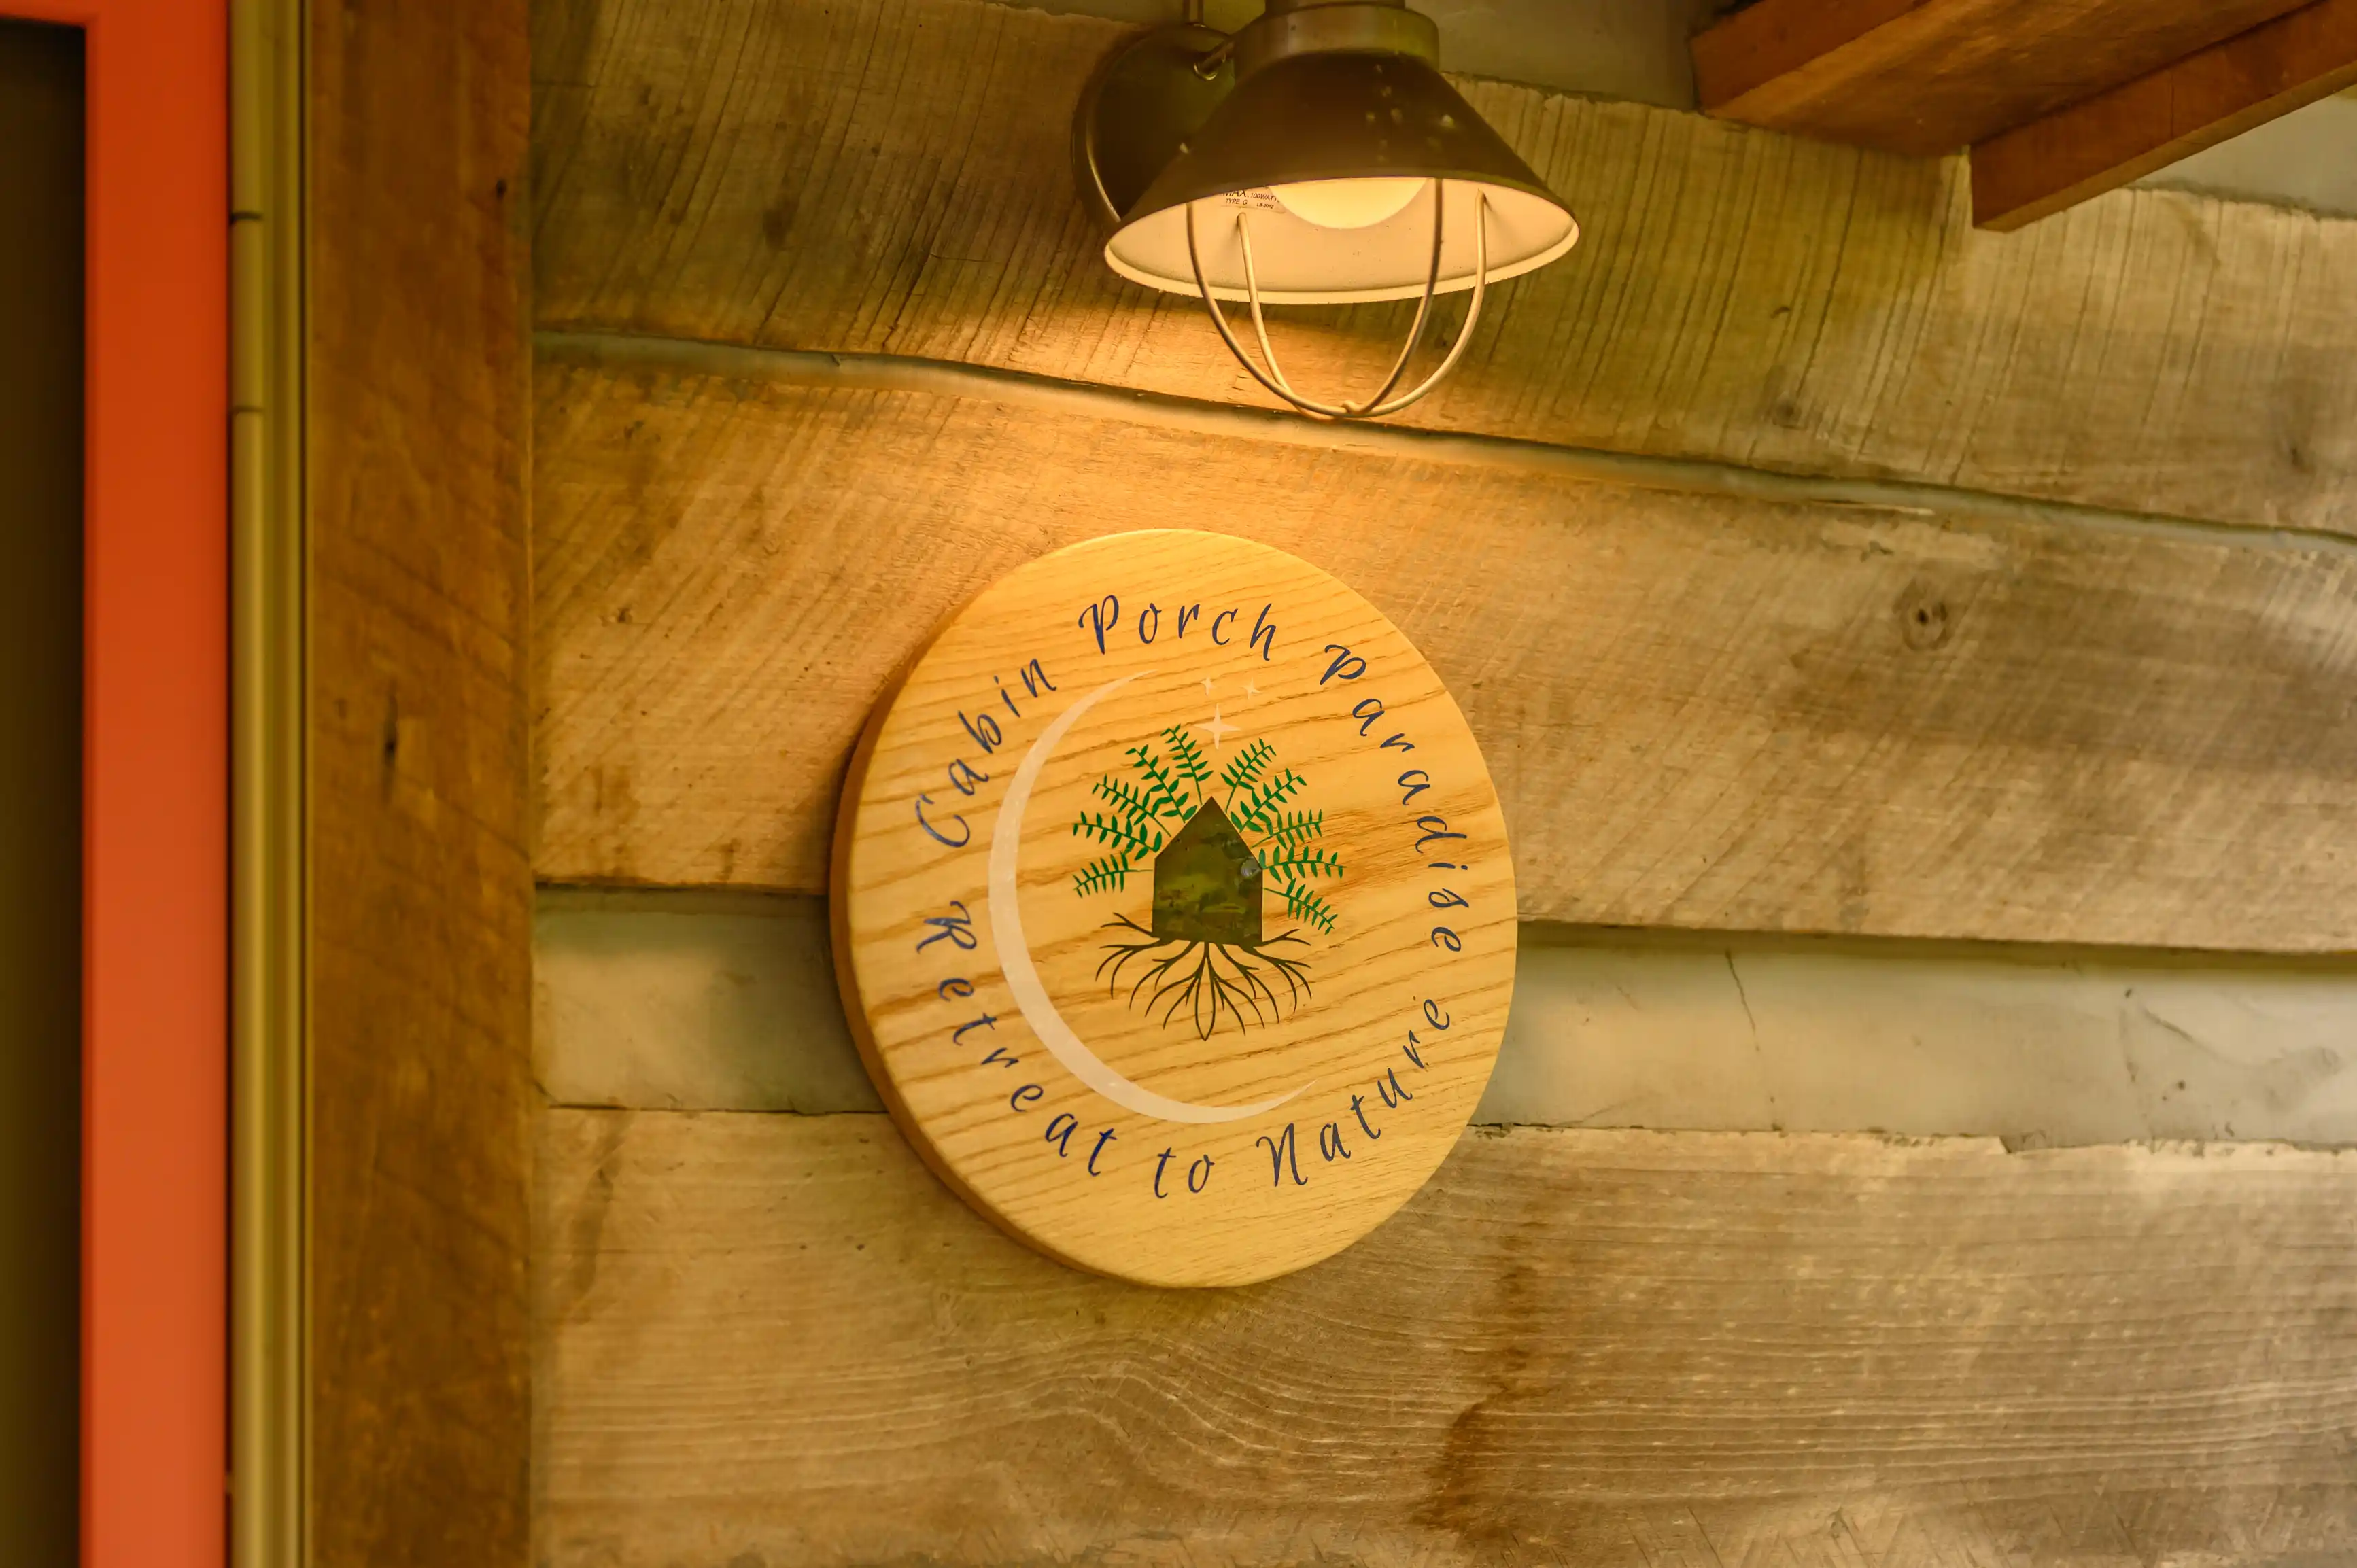 Round wooden sign with inscribed text "Cabin Porch Paradise, Retreat to Nature" on a rustic wall, illuminated by a vintage hanging lamp.